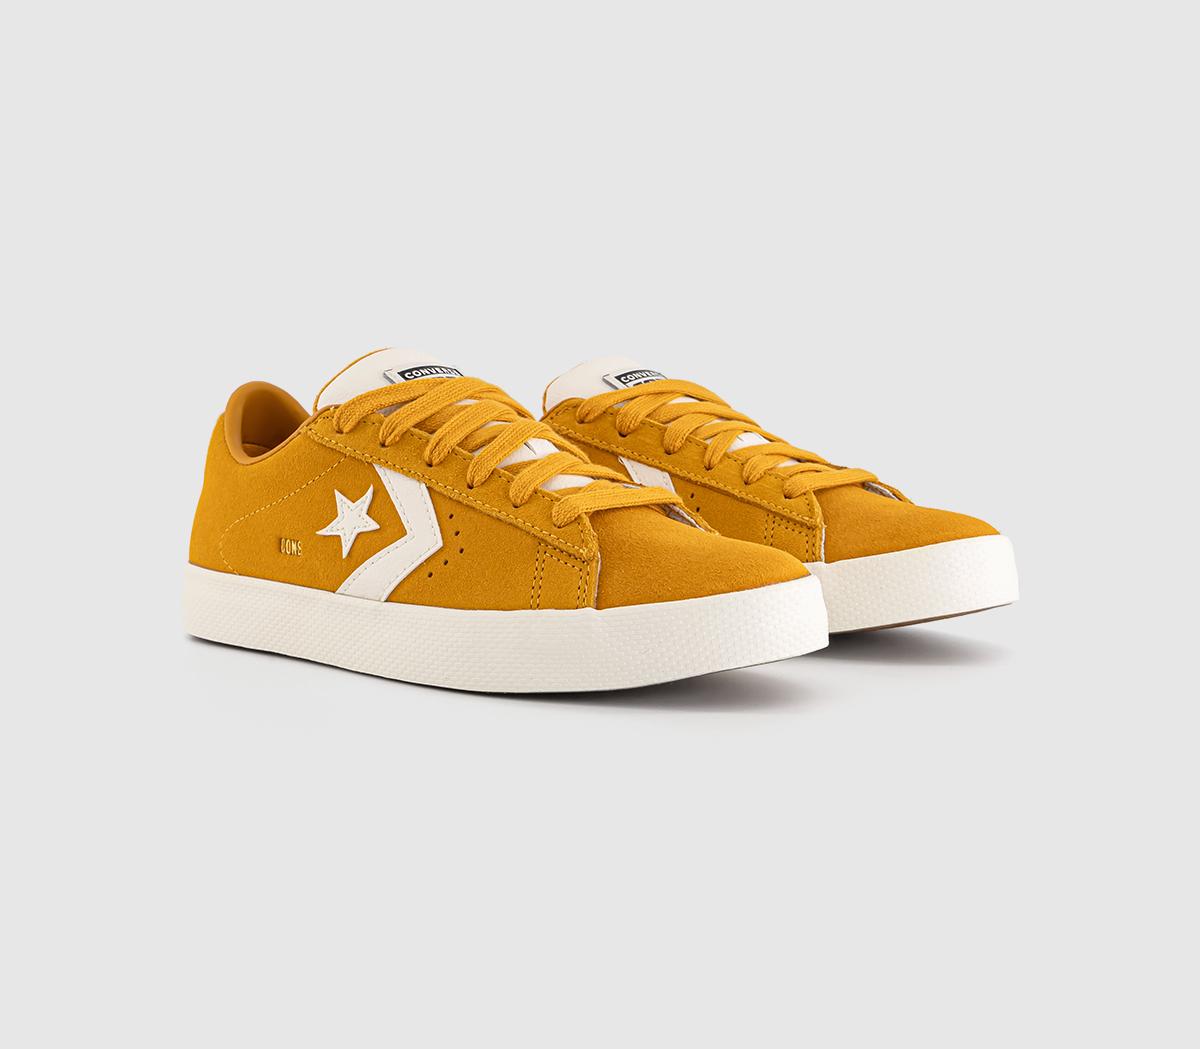 Converse Womens Pl Vulc Pro Ox Trainers Sunflower Gold Egret Yellow, 10